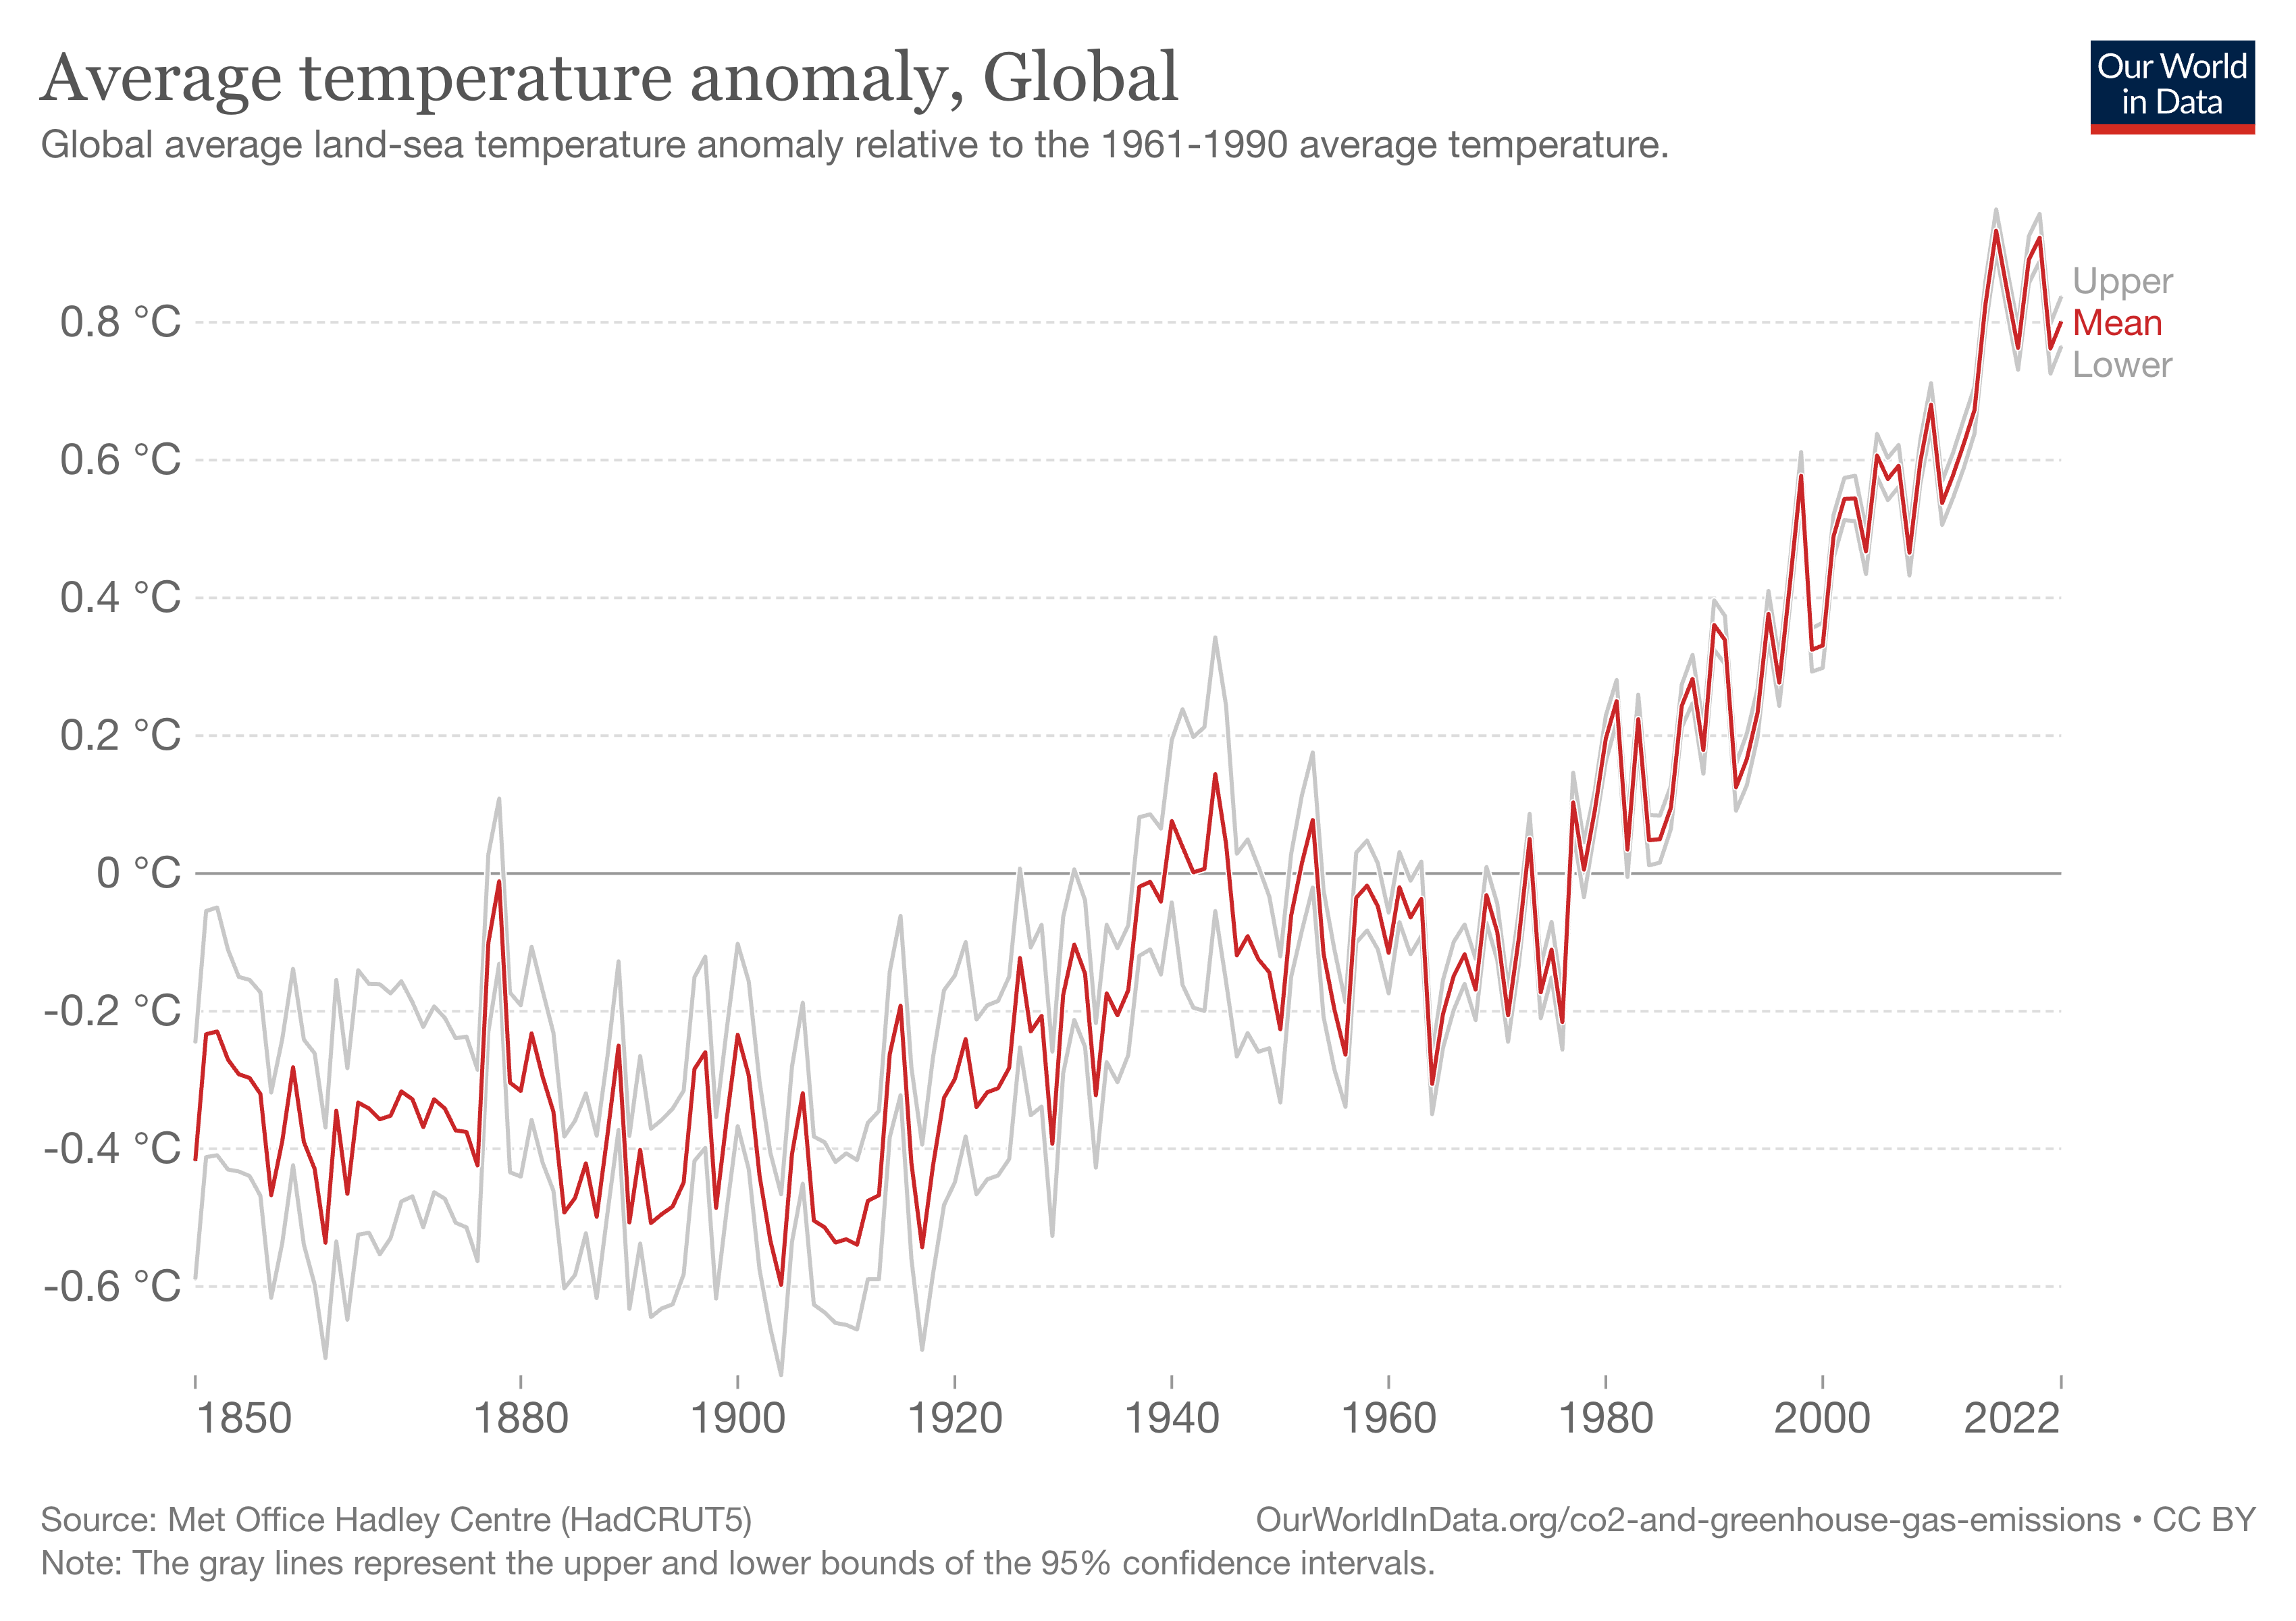 Global average land-sea temperature anomoly relative to the 1961-1990 average temperature, beginning at -0.6 degrees Celcius in 1850 and increasing in an exponential pattern to 0.8 degrees Celcius in 2022